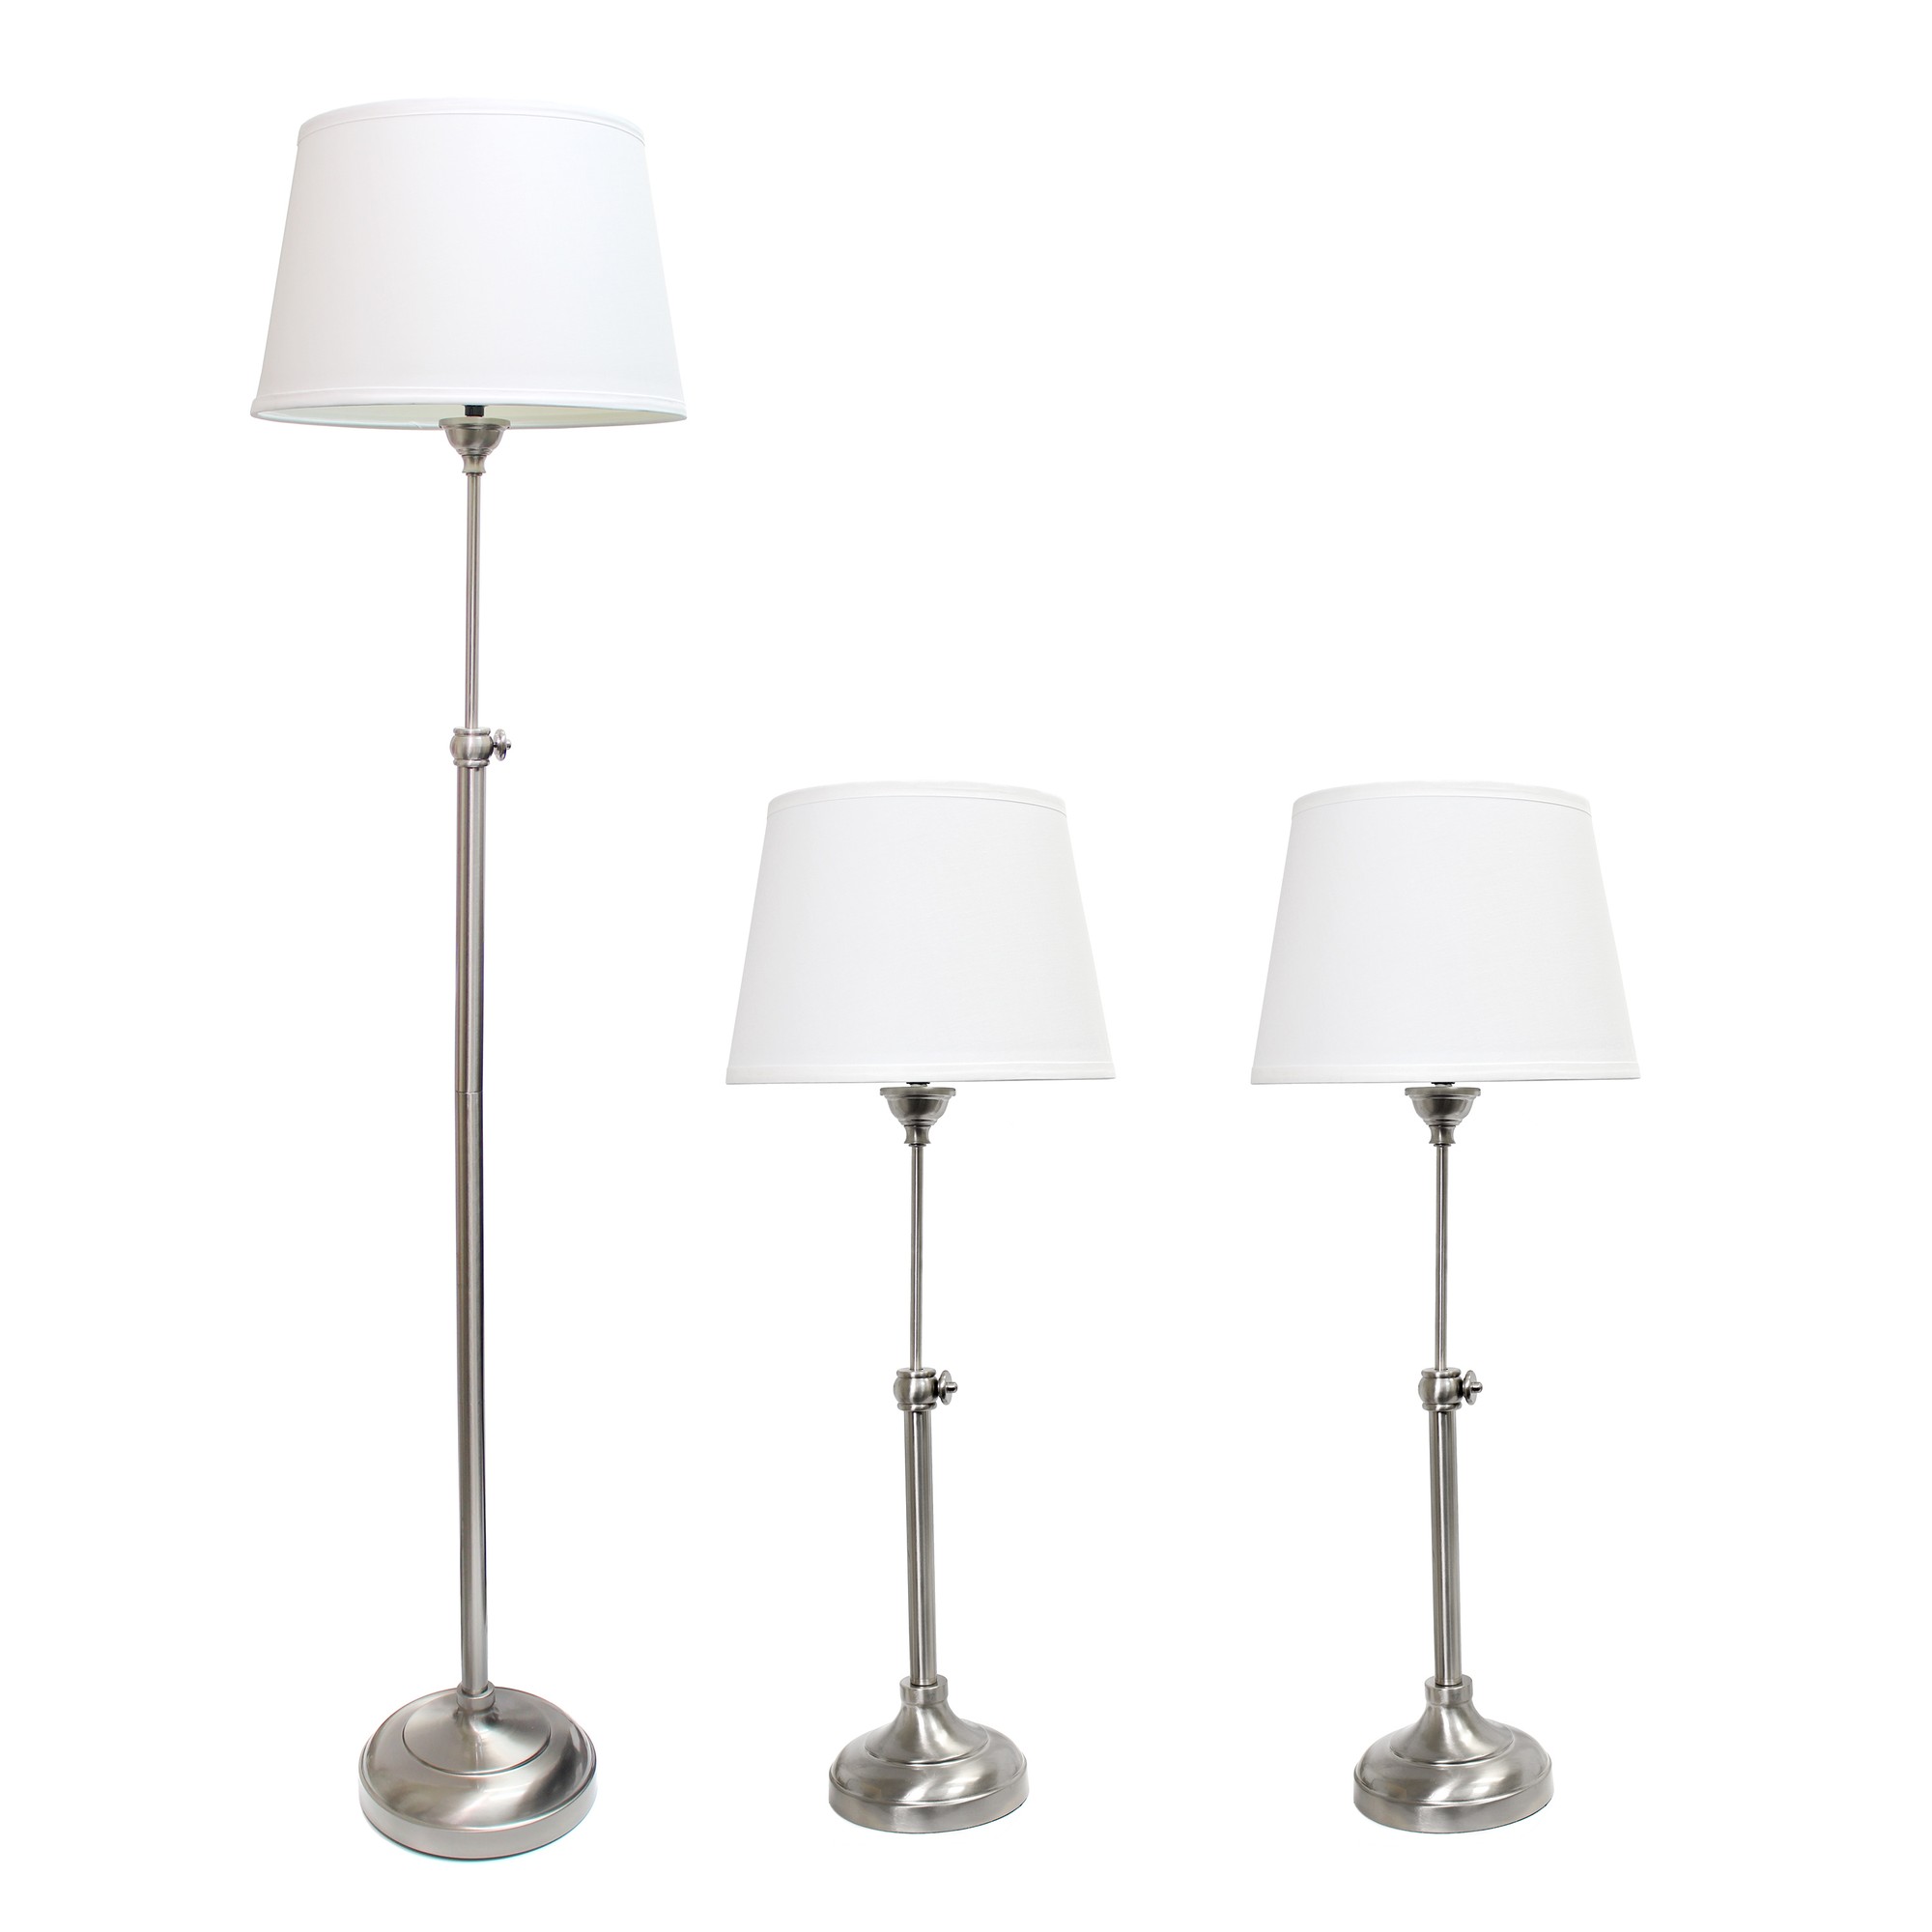 Lalia Home 3 Piece Metal Lamp Set (2 Table Lamps, 1 Floor Lamp) White Tapered Drum Fabric Shades and Brushed Nickel Finish